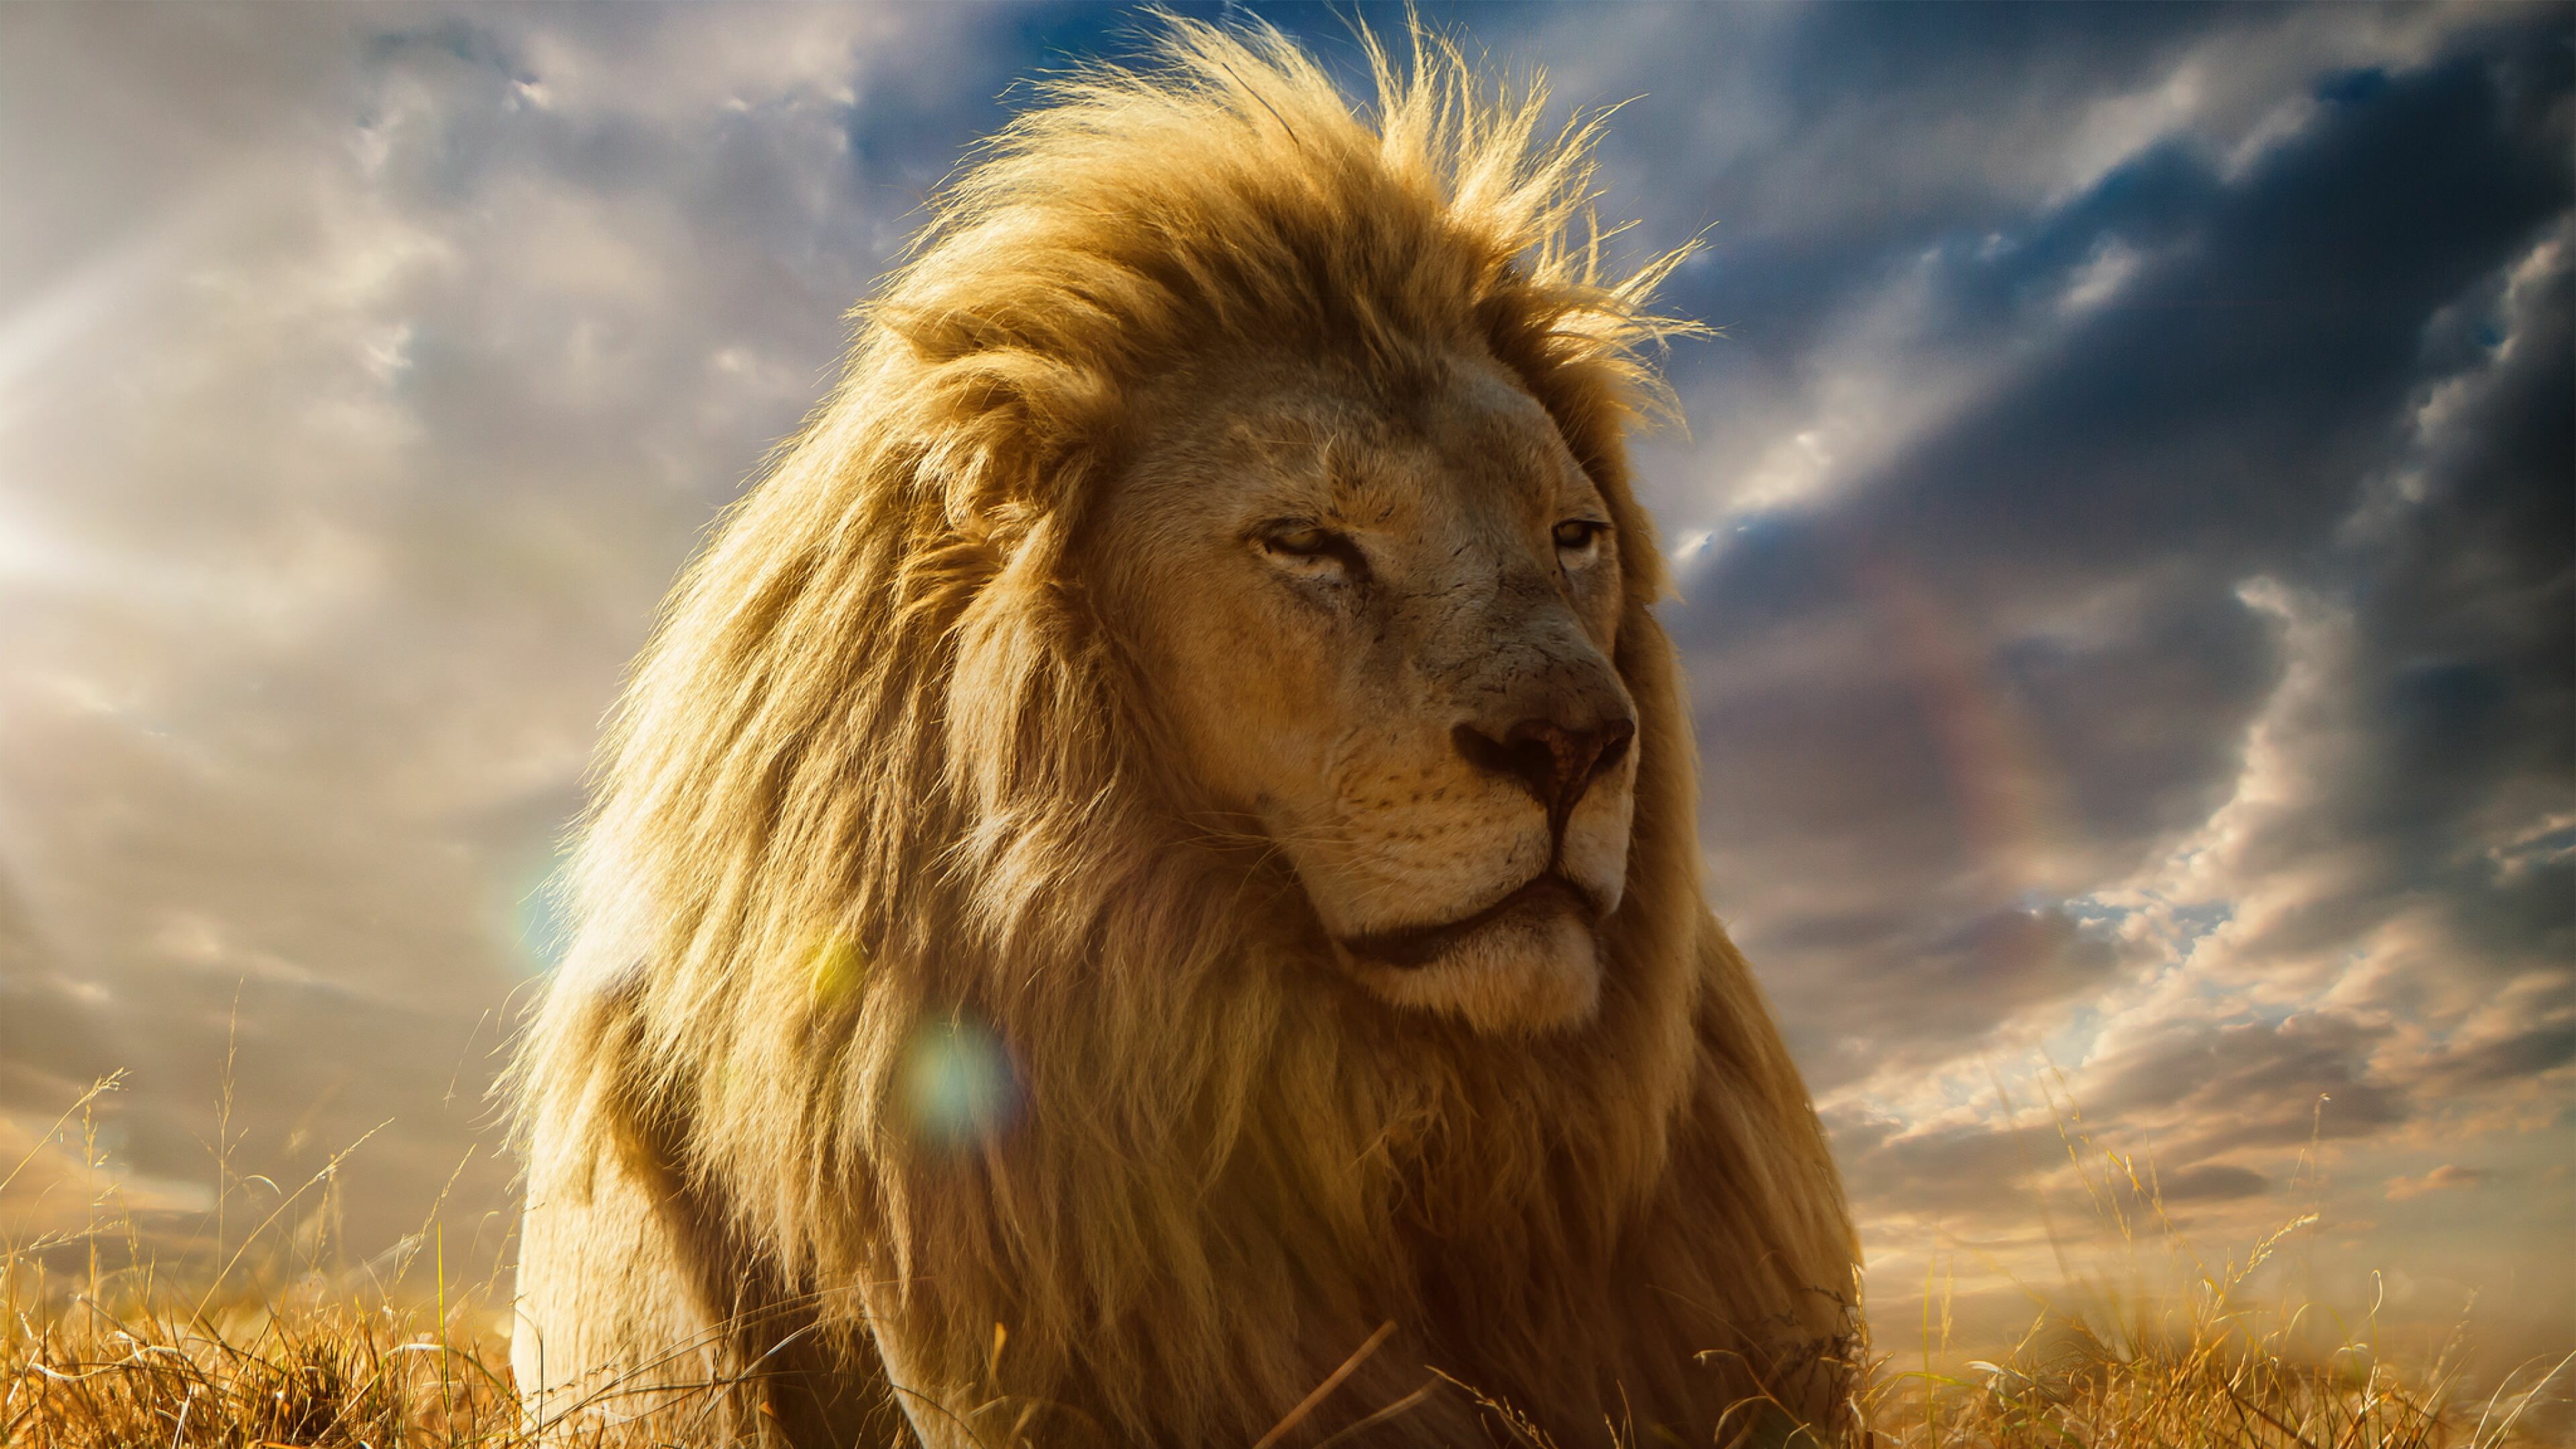 The Lion King: A pride of lions rule over the animal kingdom from Pride Rock, Animated movie. 3840x2160 4K Wallpaper.